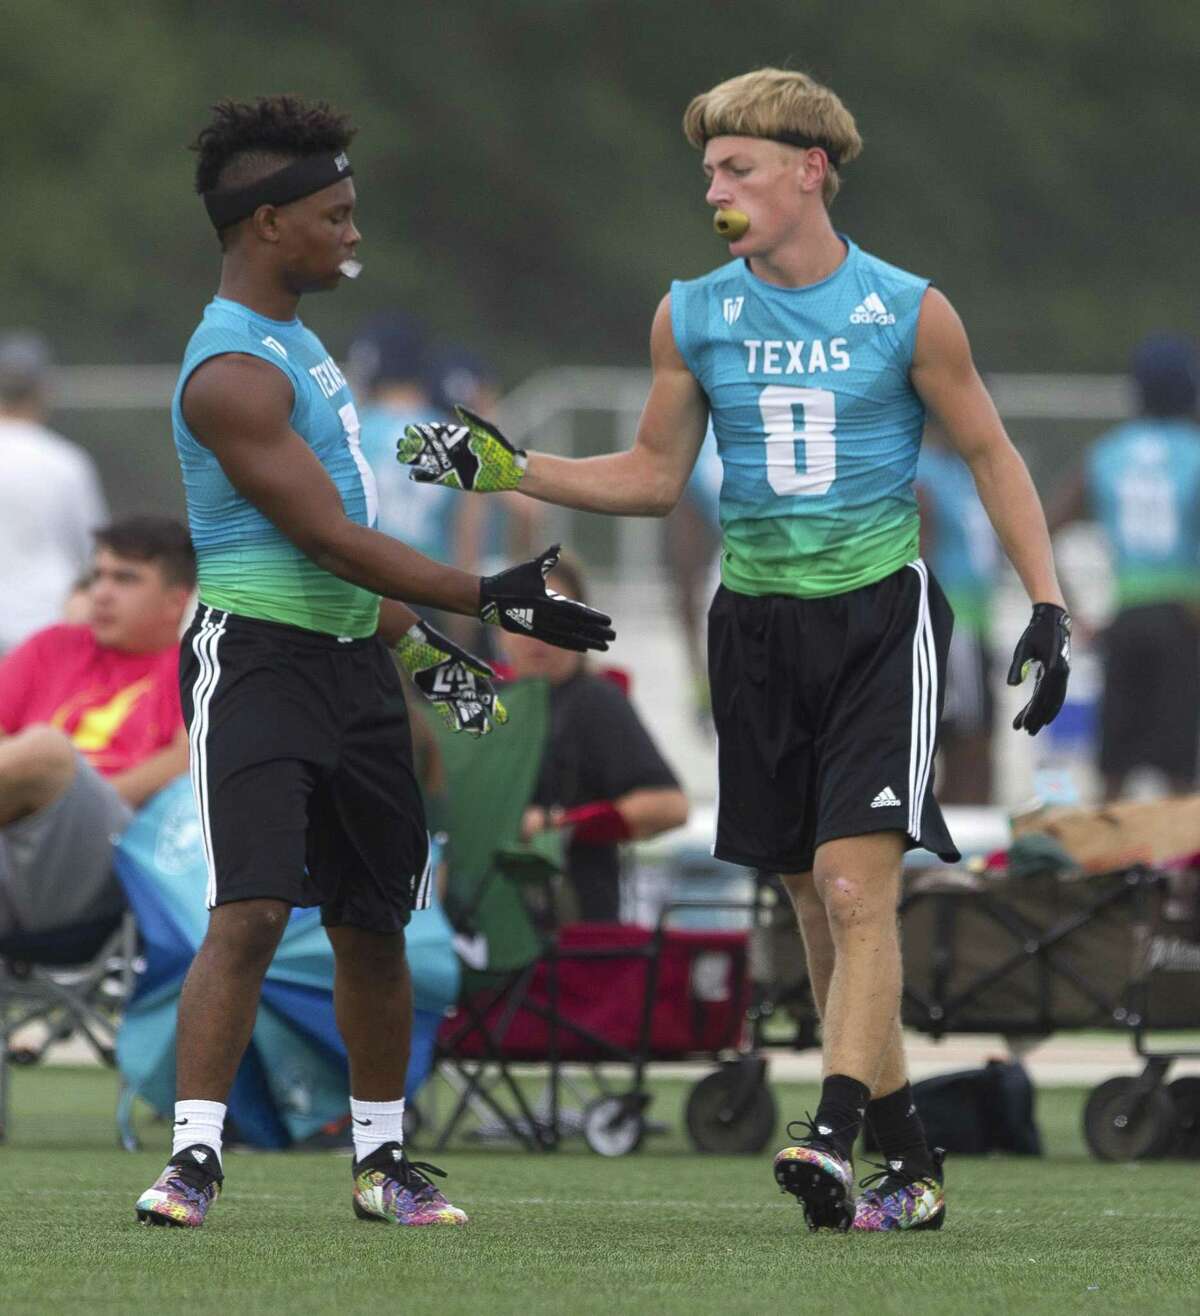 The Woodlands’ Austin Winfield (1) gives teammate Abb Acuff (8) a high-five after breaking up a pass during a game at the 7-on-7 state tournament at Veterans Park and Athletic Complex on Saturday in College Station.